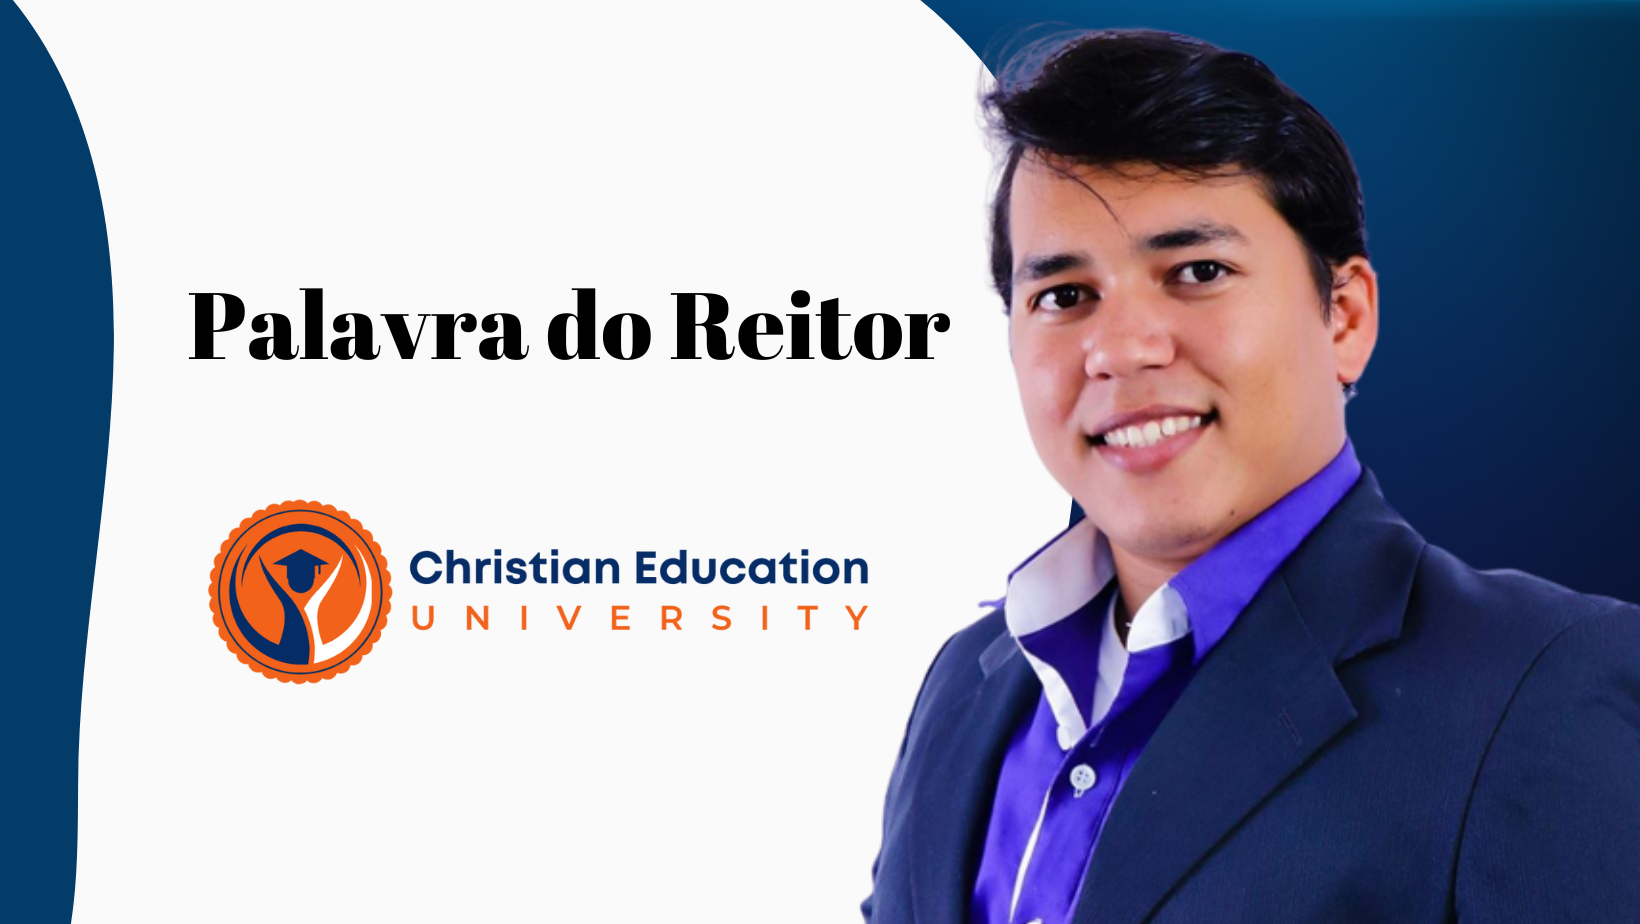 You are currently viewing Palavra do Reitor da Christian Education University